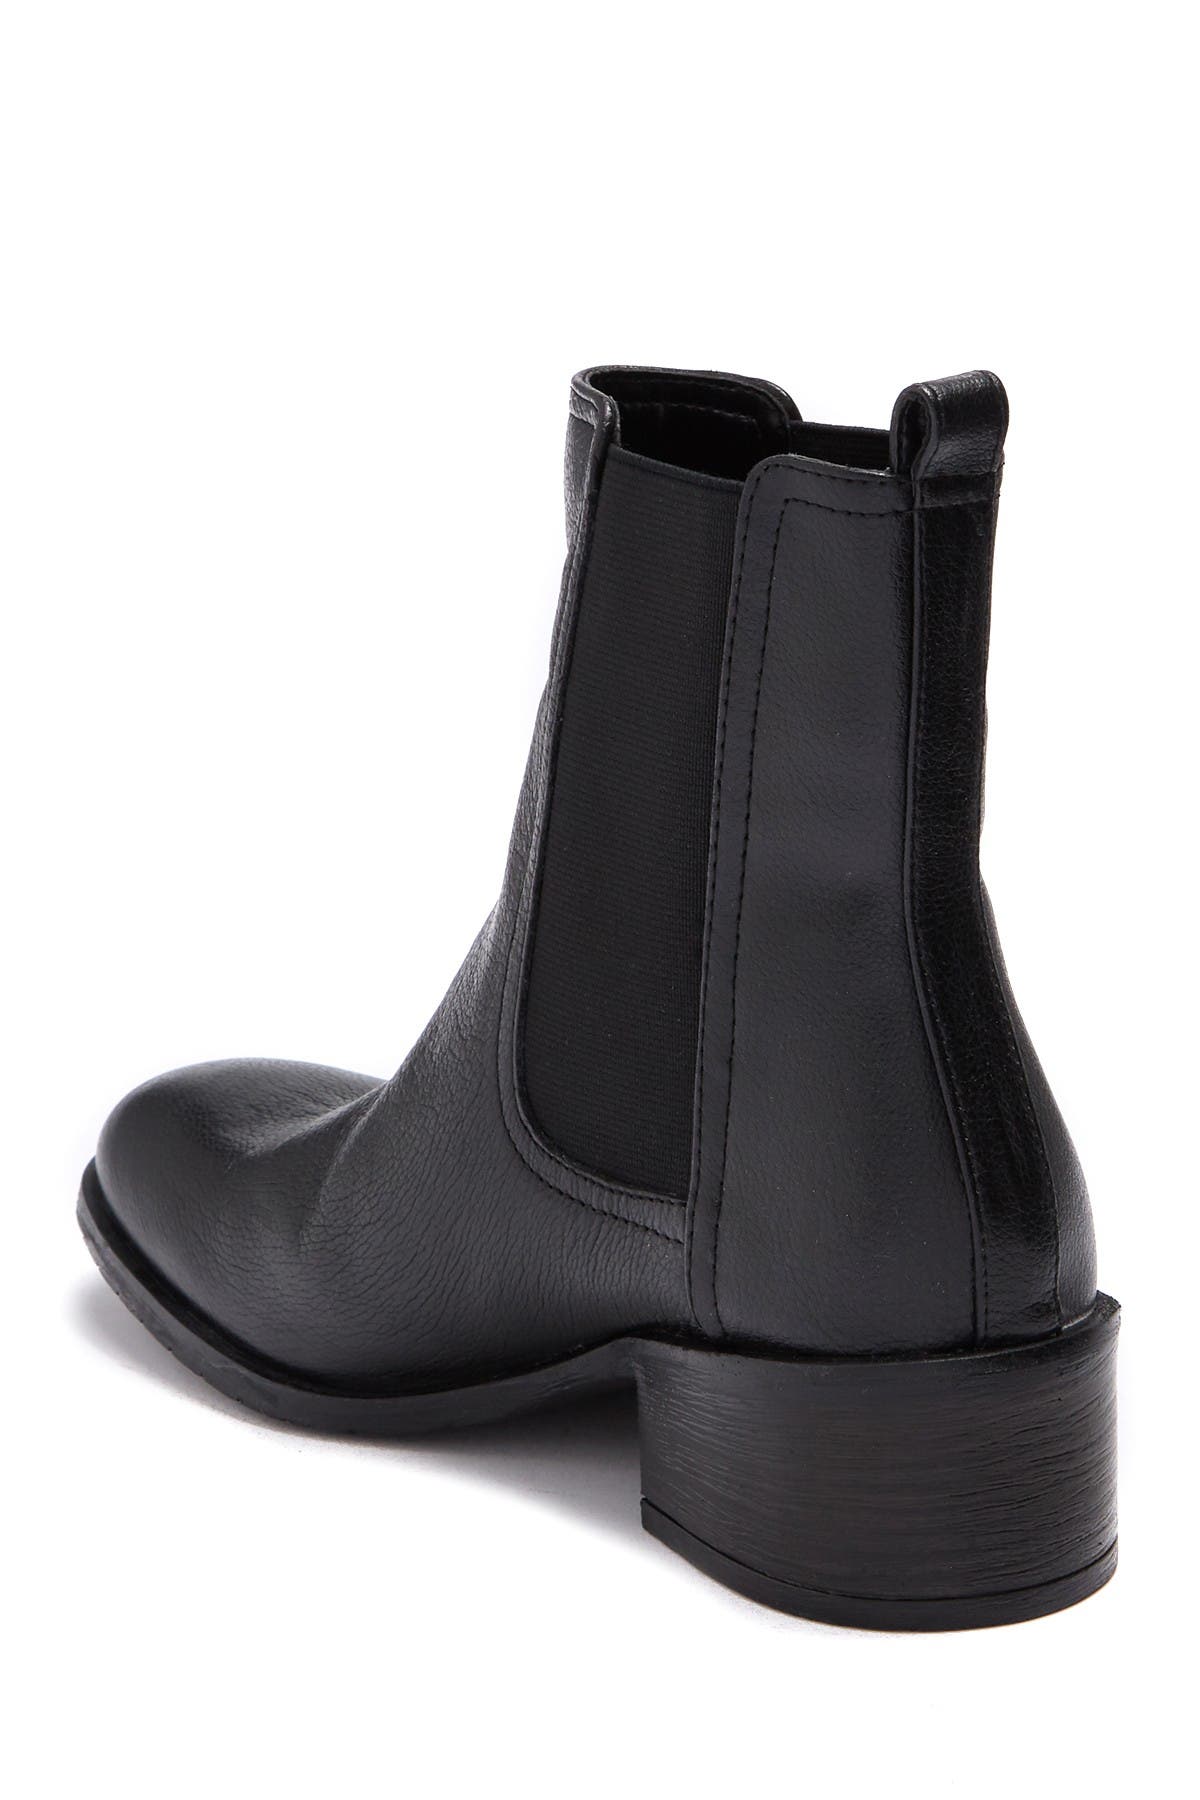 kenneth cole reaction black boots